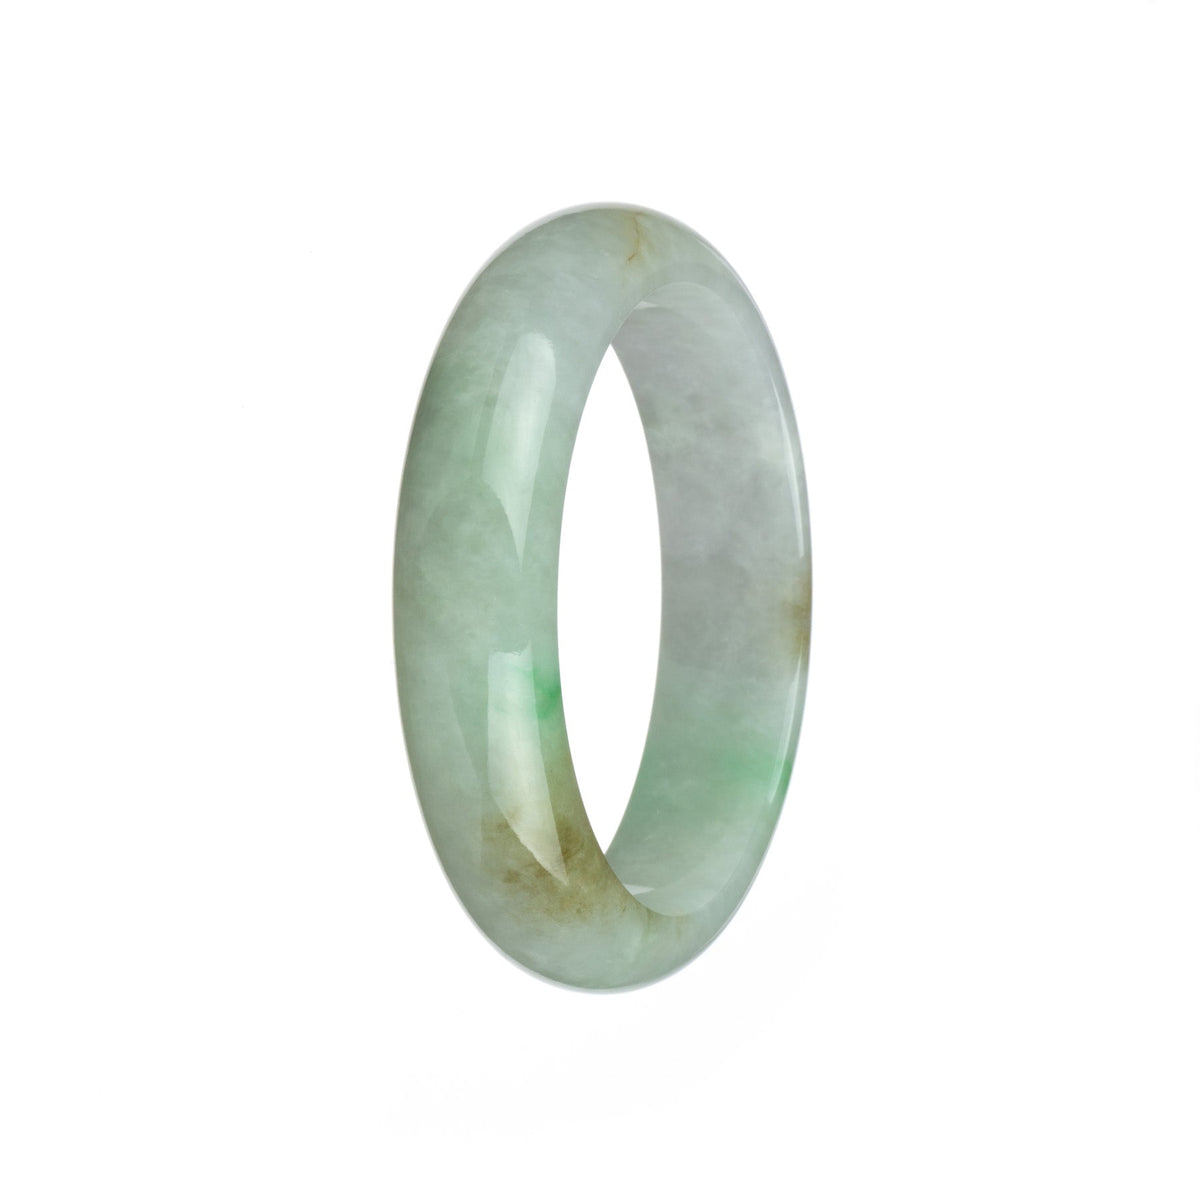 An elegant half moon shaped jade bangle bracelet in Grade A White with Apple Green Jadeite. Measures 57mm in diameter. A genuine and high-quality piece by MAYS™.